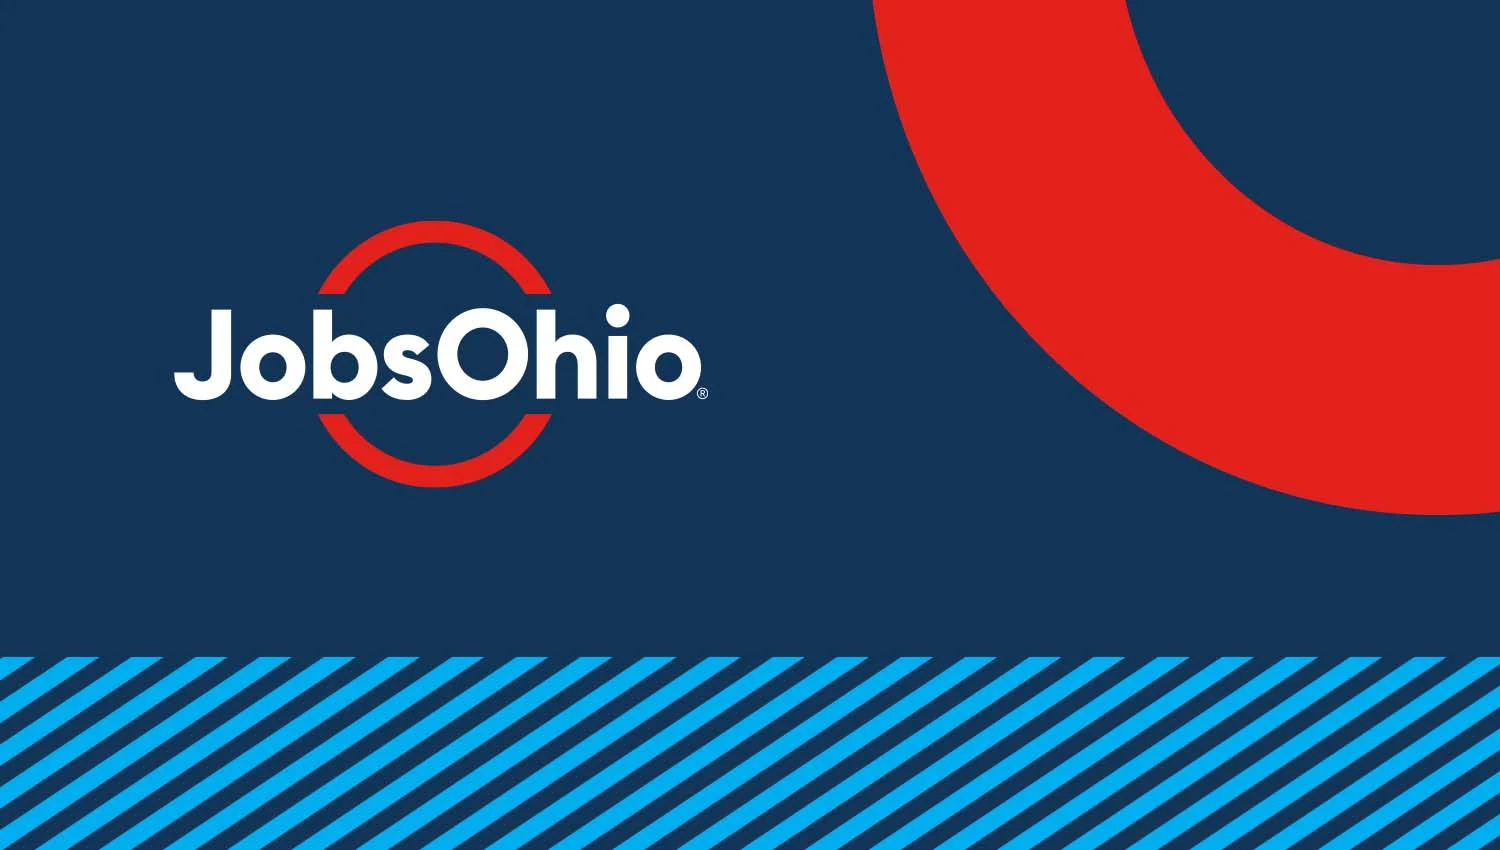 JobsOhio logo on a blue background with a red arch